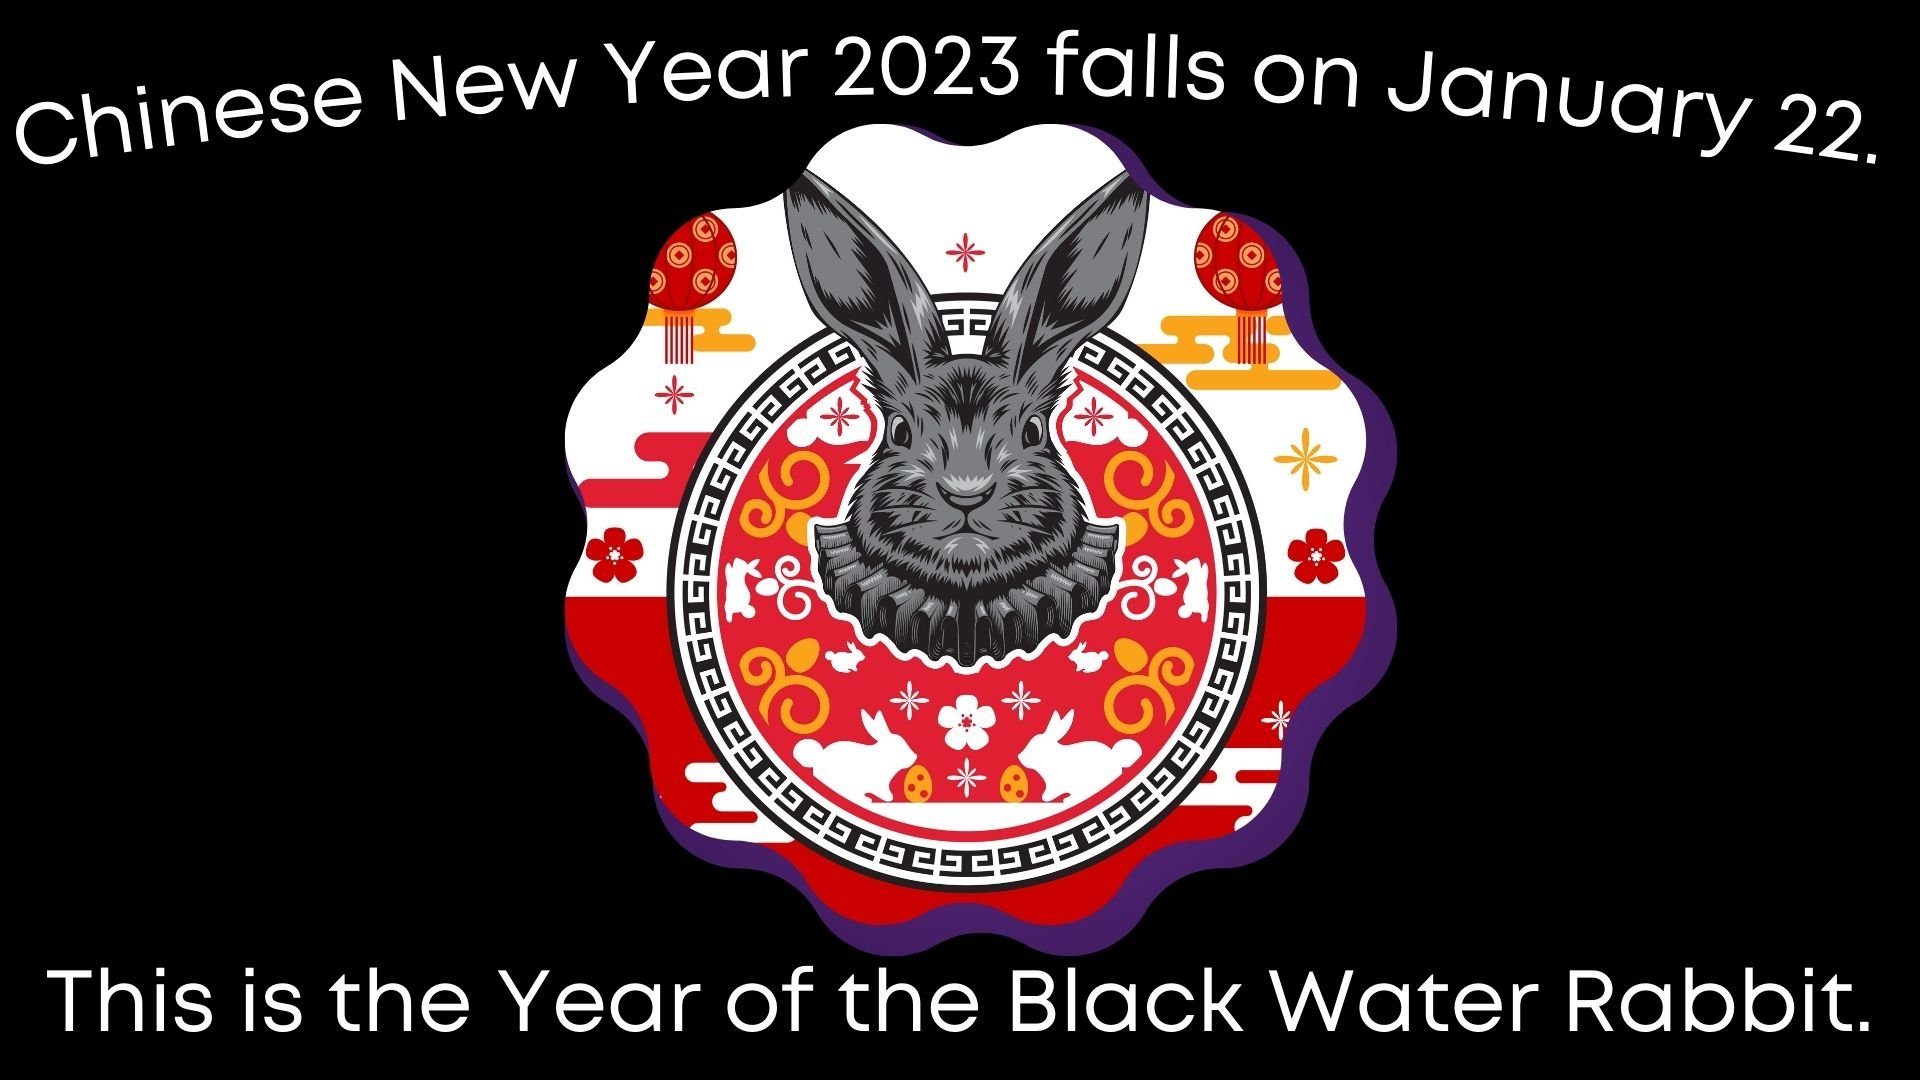 Lunar New Year 2023: Offers